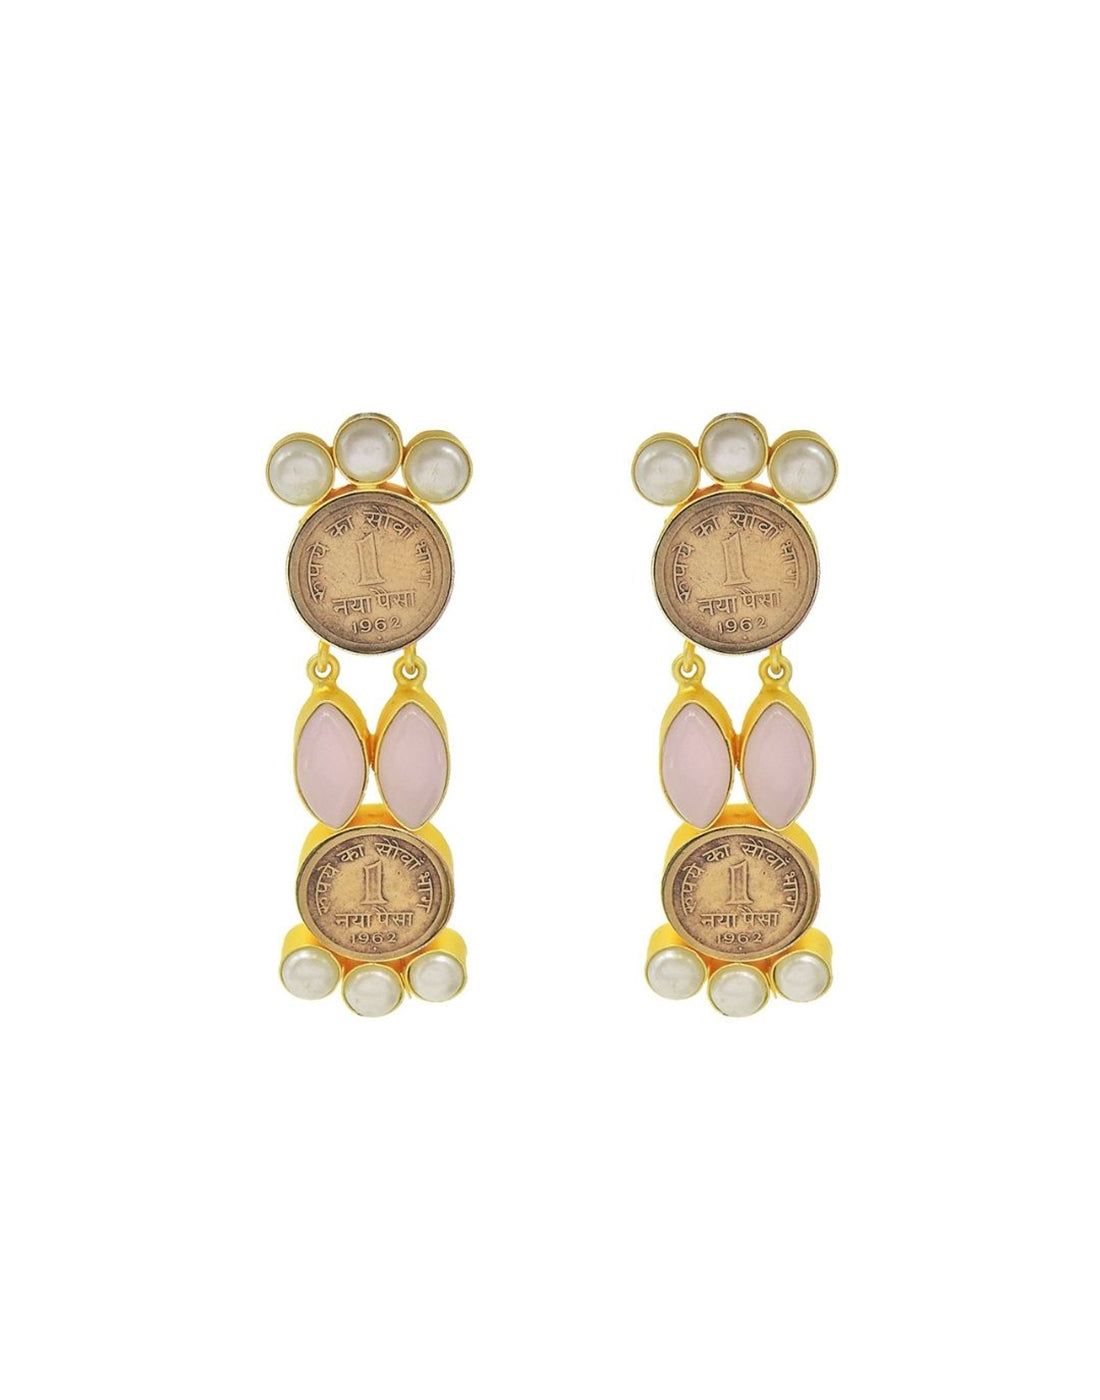 Cora Earrings- Handcrafted Jewellery from Dori